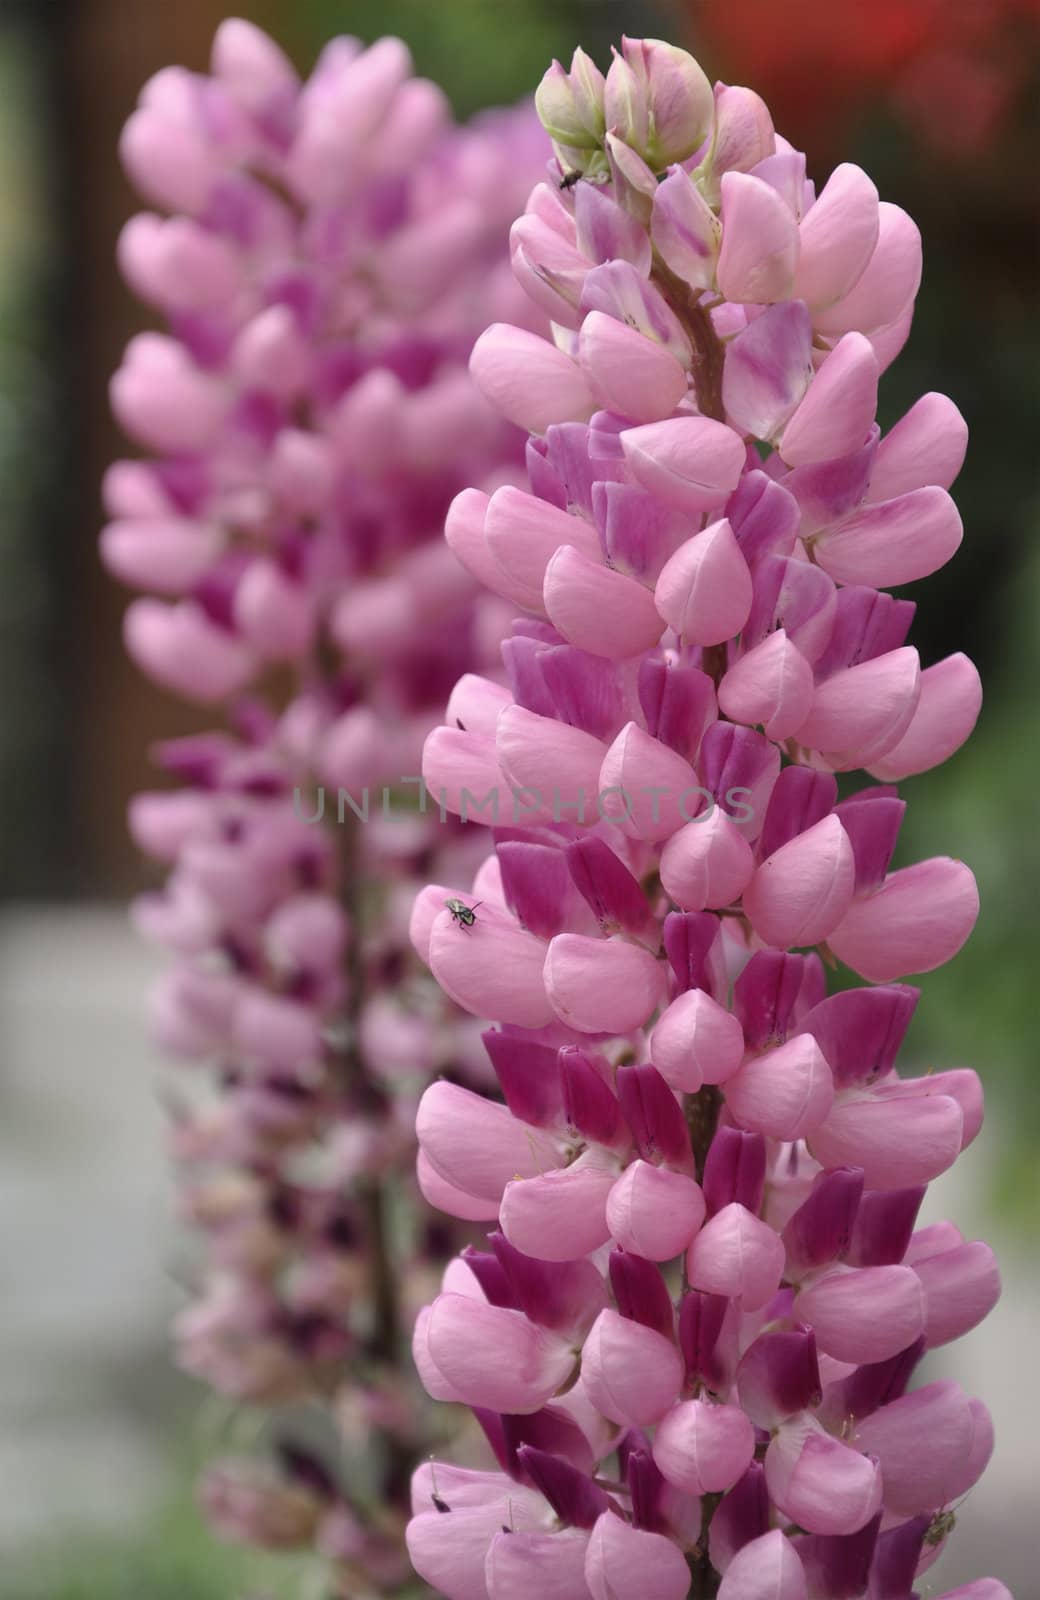 A beautiful bunch of pink lupines